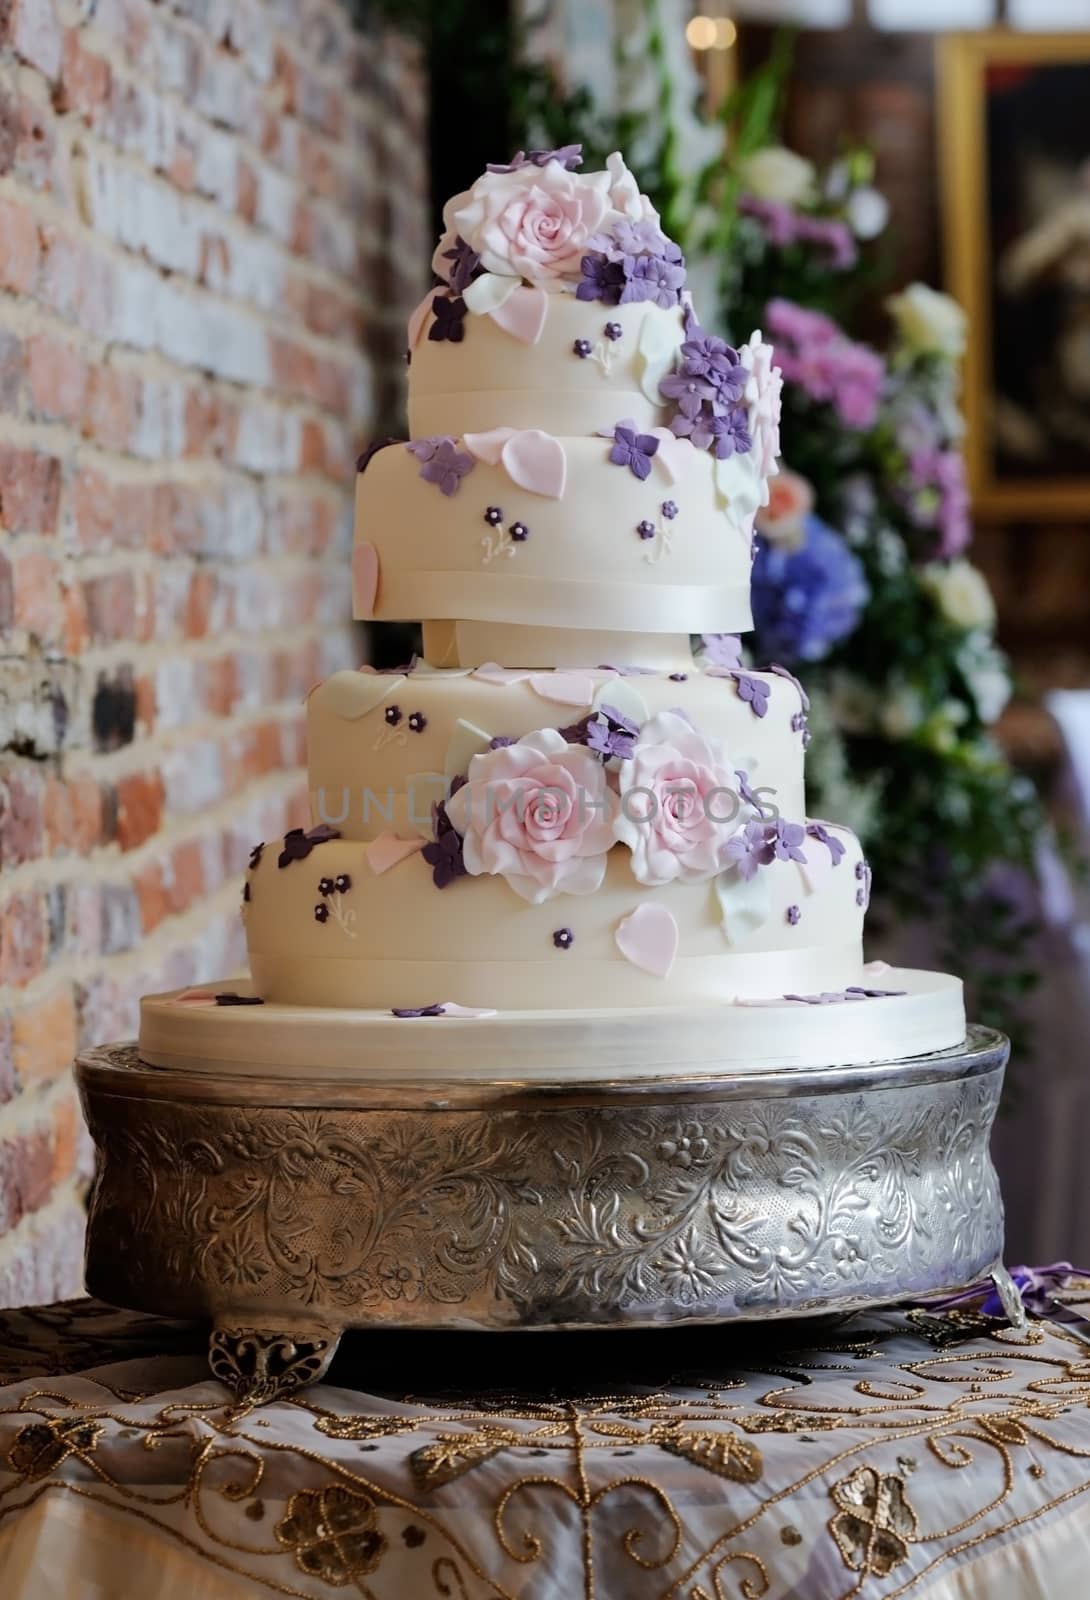 Wedding cake at reception has intricate decoration of pink and purple flowers